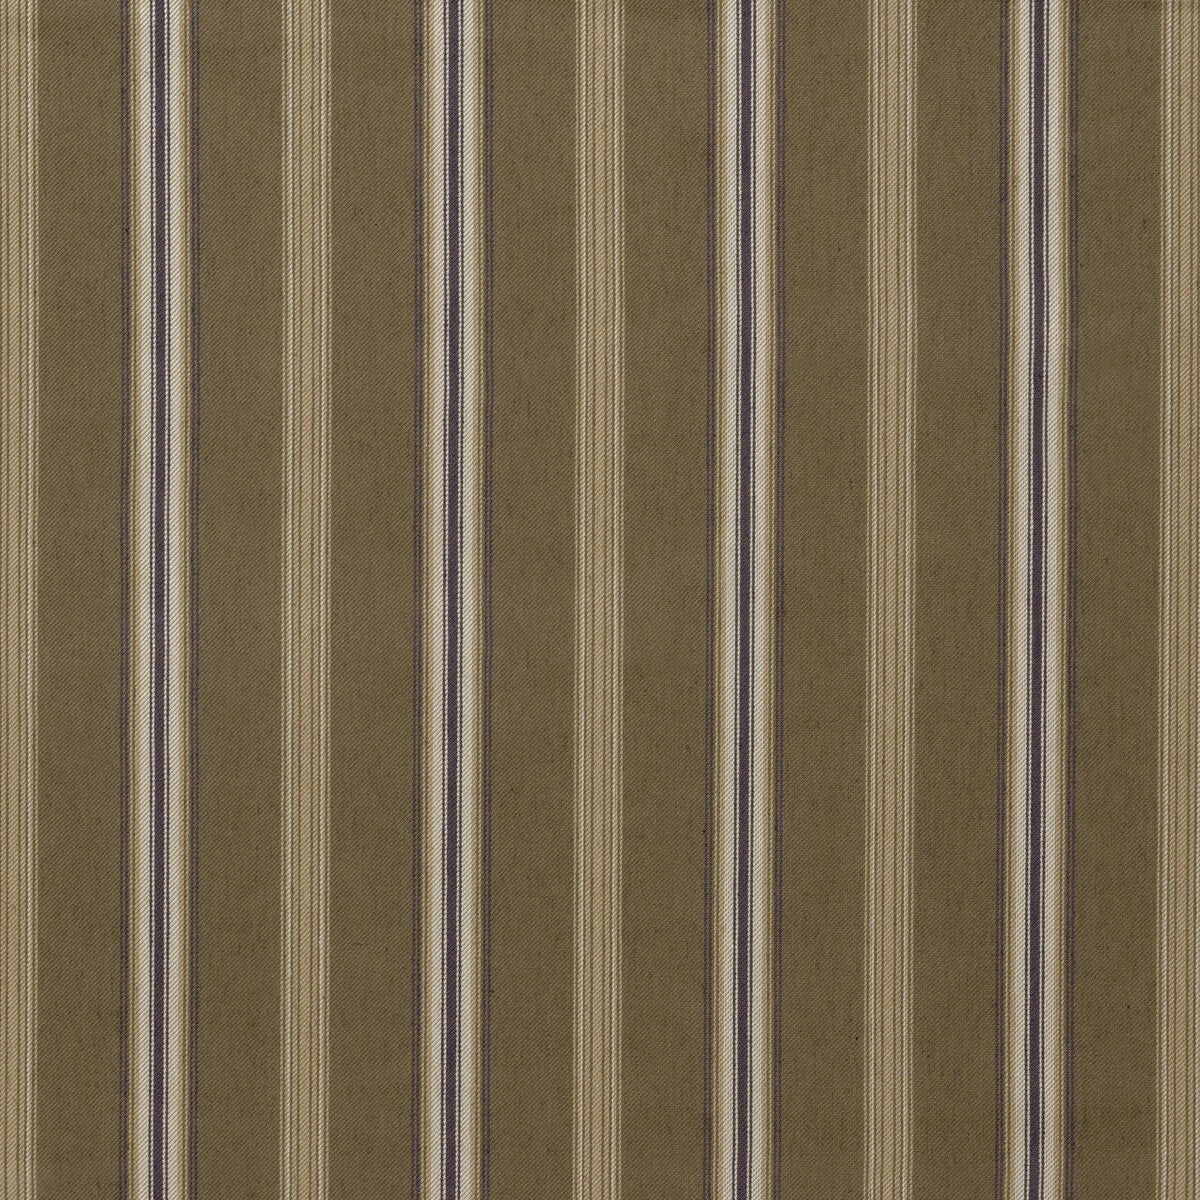 Canfield Stripe fabric in mink color - pattern BFC-3670.106.0 - by Lee Jofa in the Blithfield collection